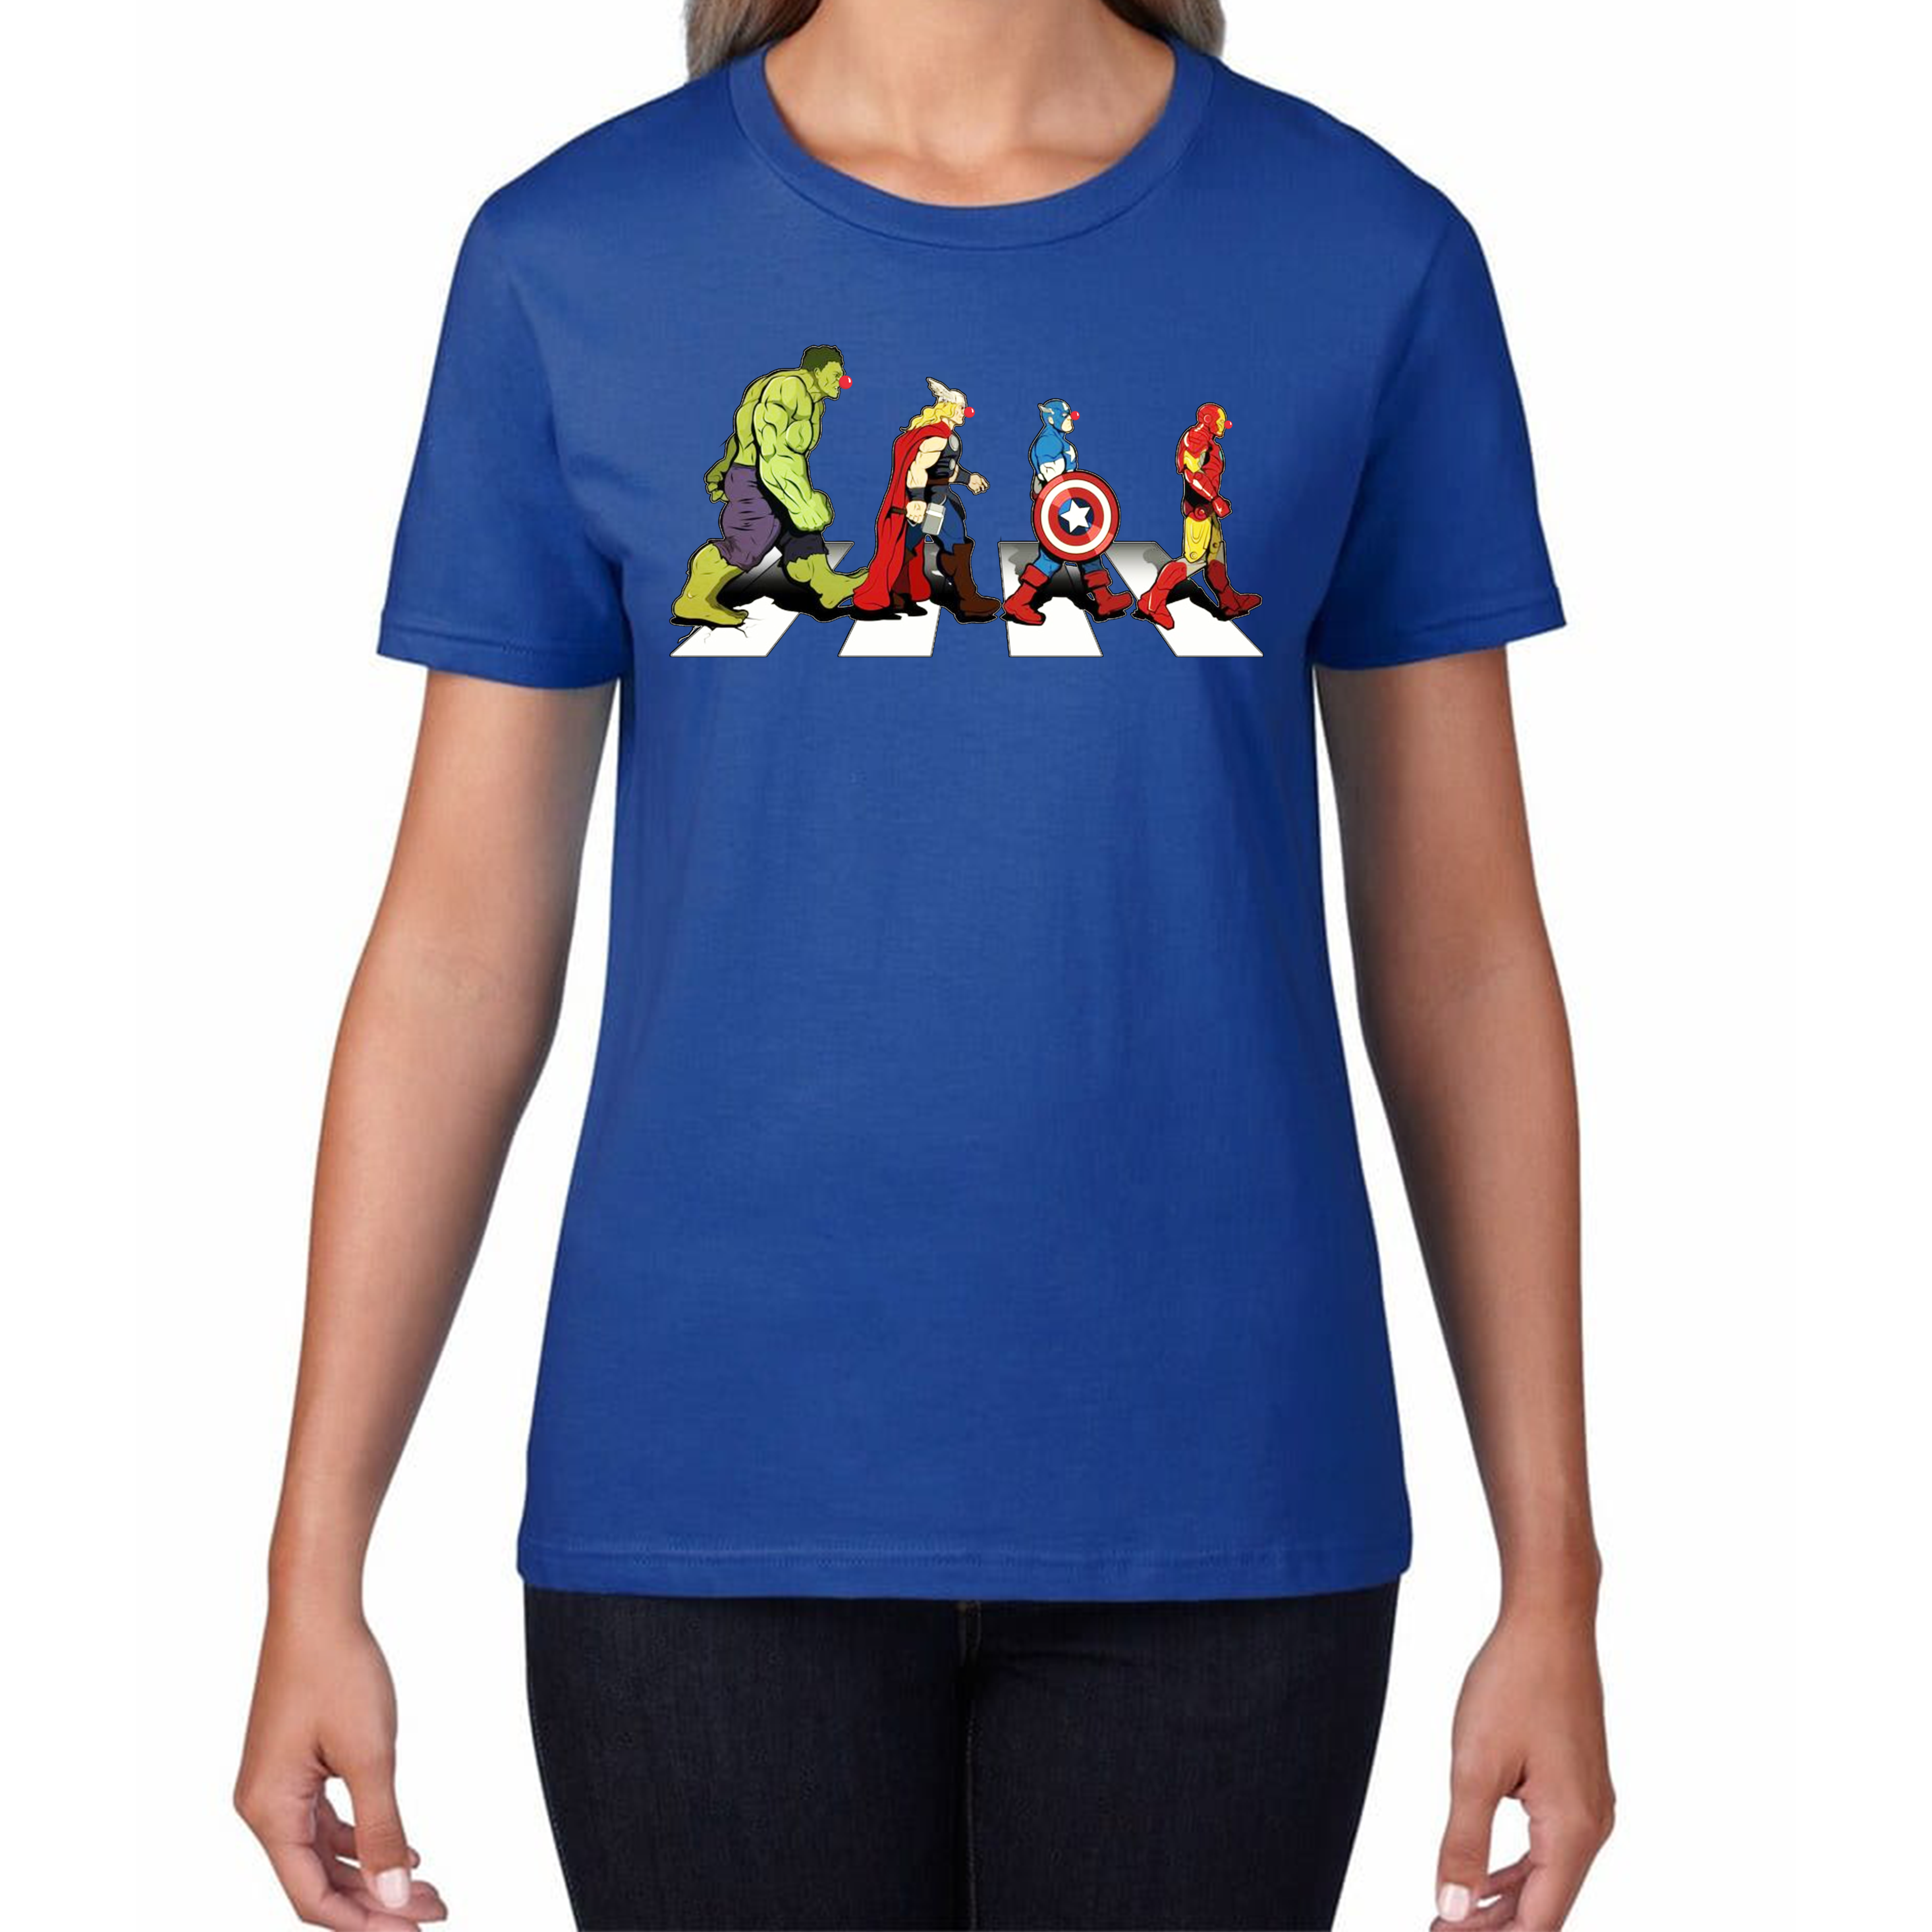 Hulk Thor Captain America Iron Man Marvel Avengers Abbey Road Red Nose Day Ladies T Shirt. 50% Goes To Charity